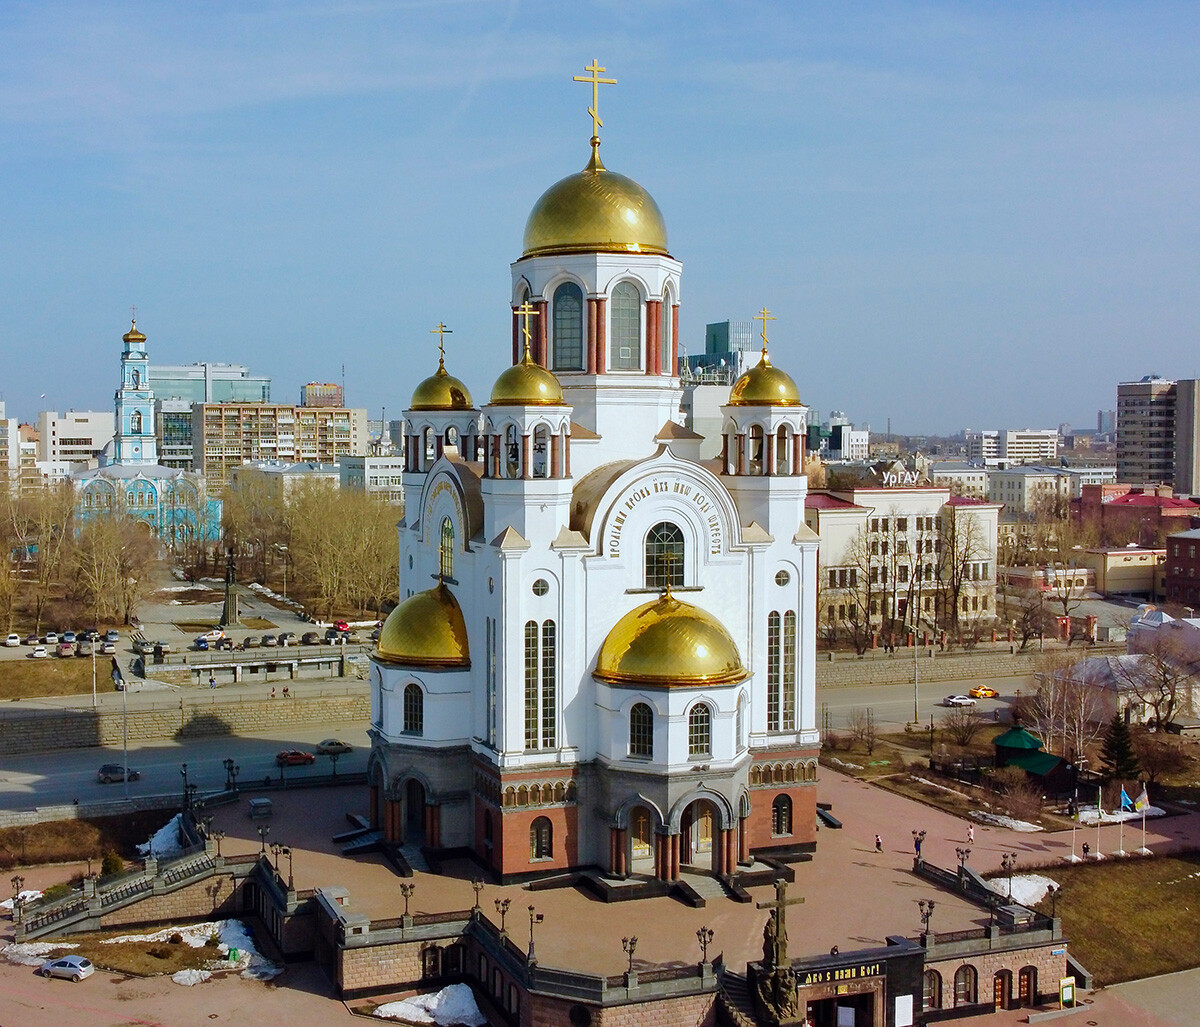 The Church of All Saints on Blood in Yekaterinburg was built in early 2000s on the site of the Ipatiev House where the tsar's family was killed